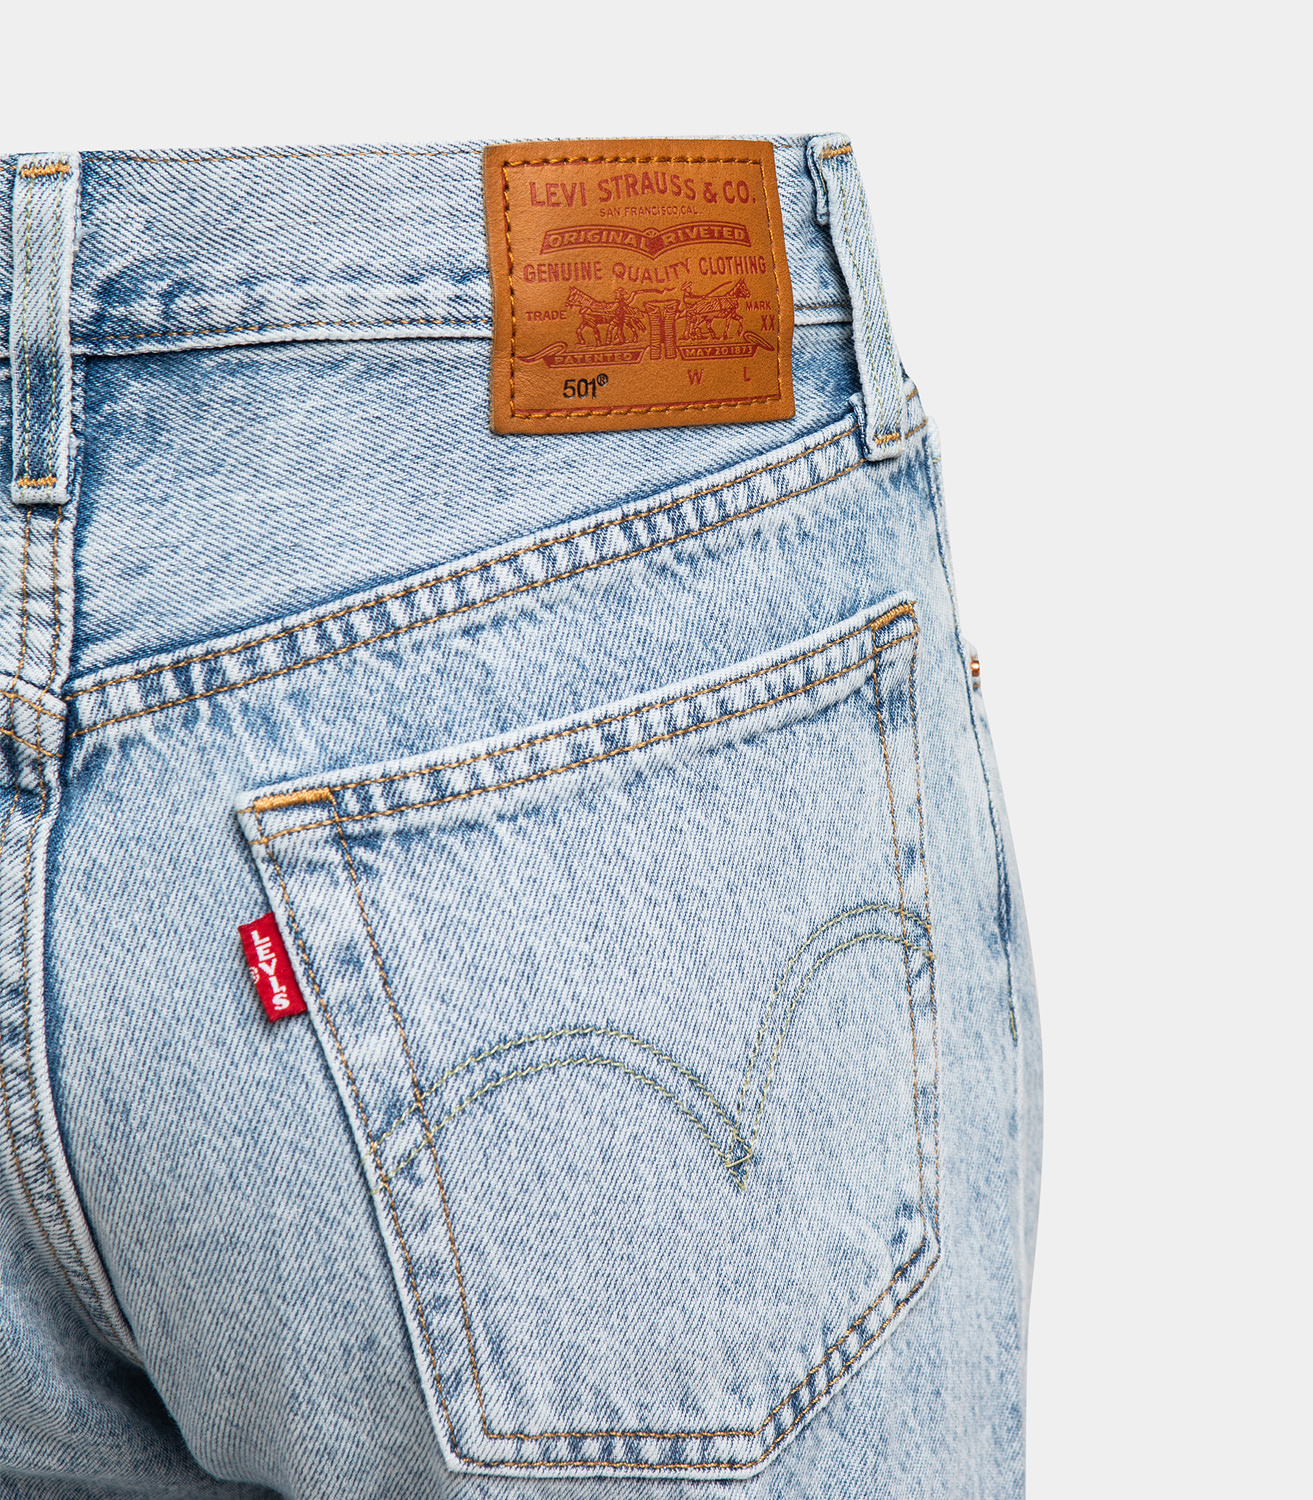 levis jeans offers